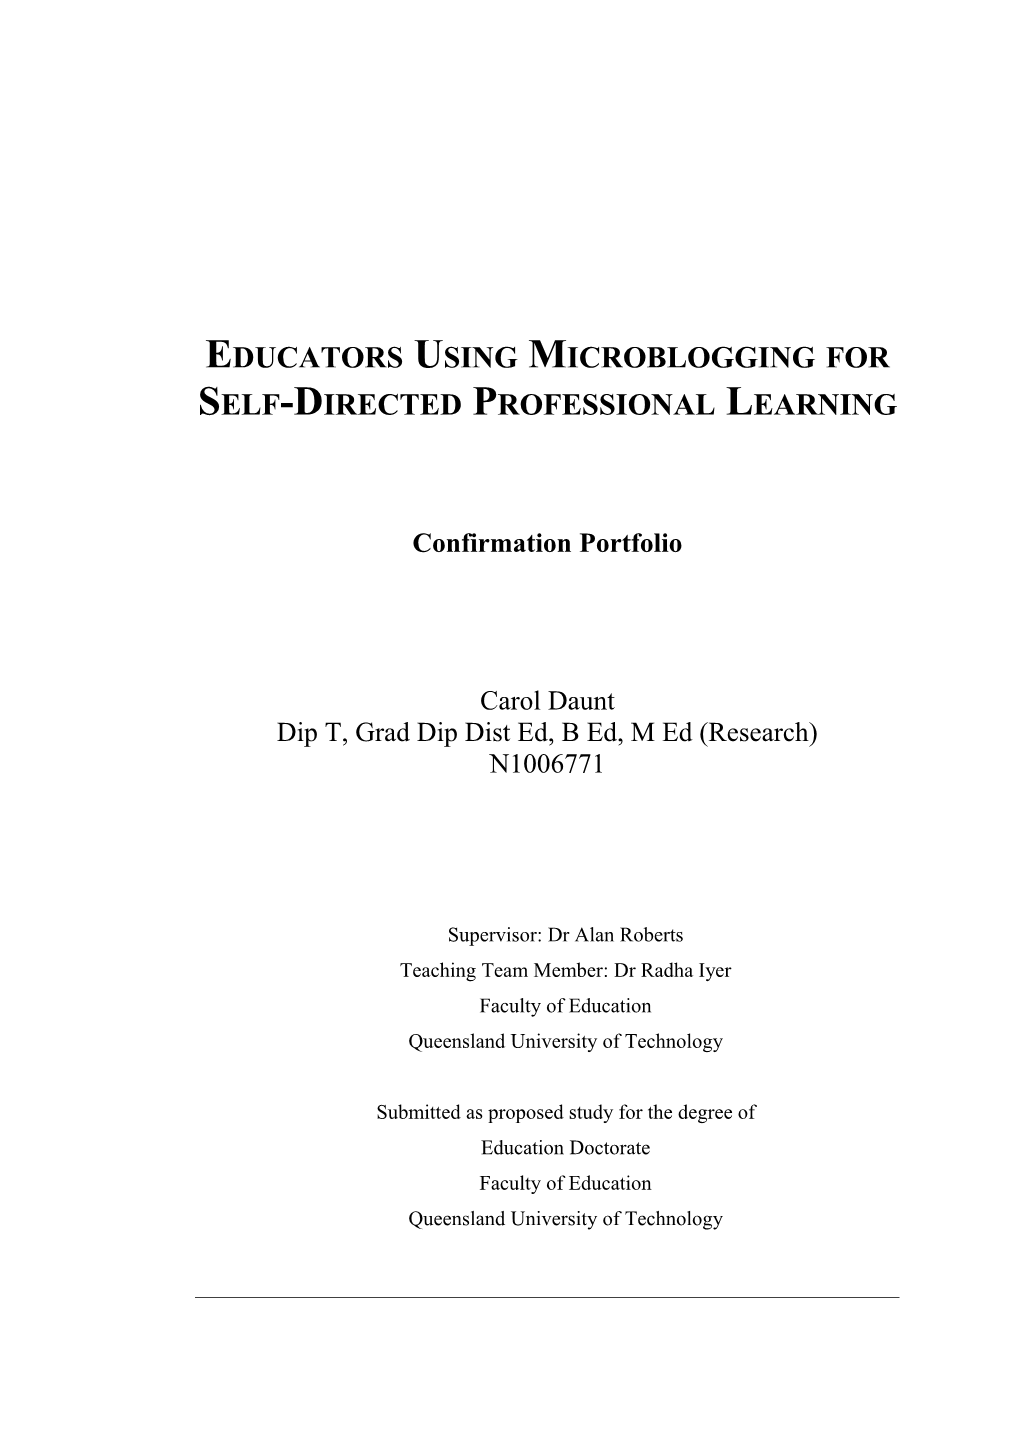 Educators Using Microblogging for Self-Directed Professional Learning